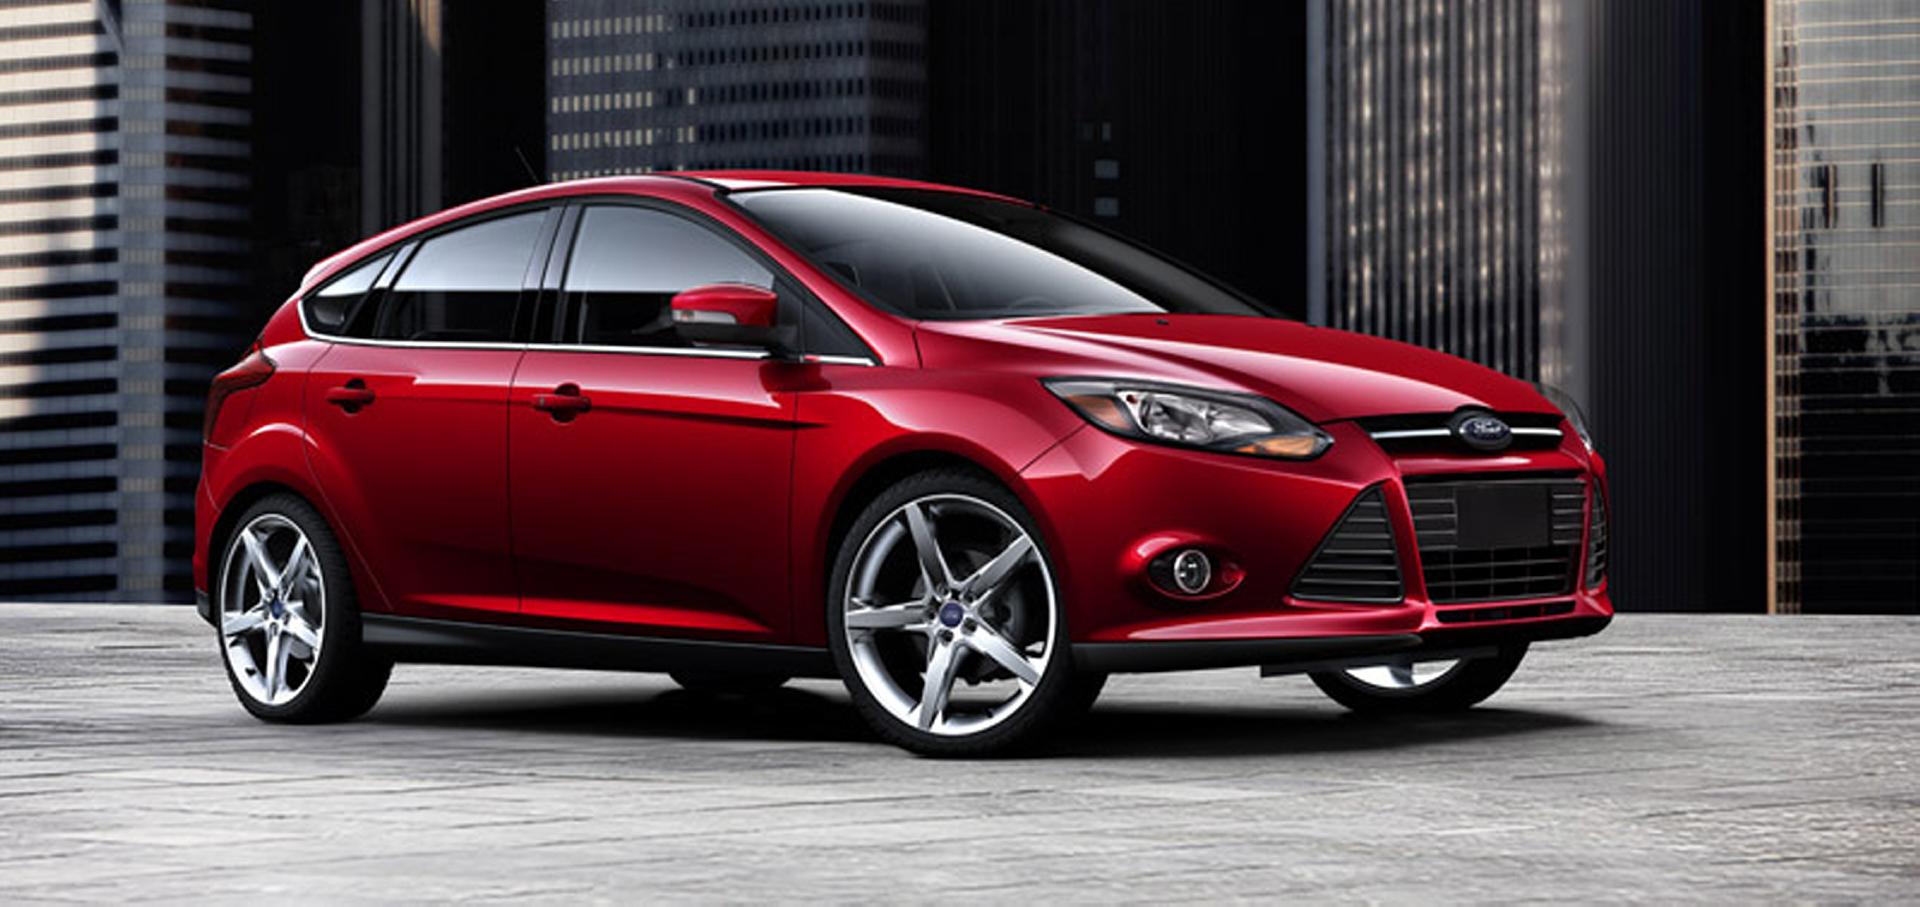 2014_Ford Focus Image 01